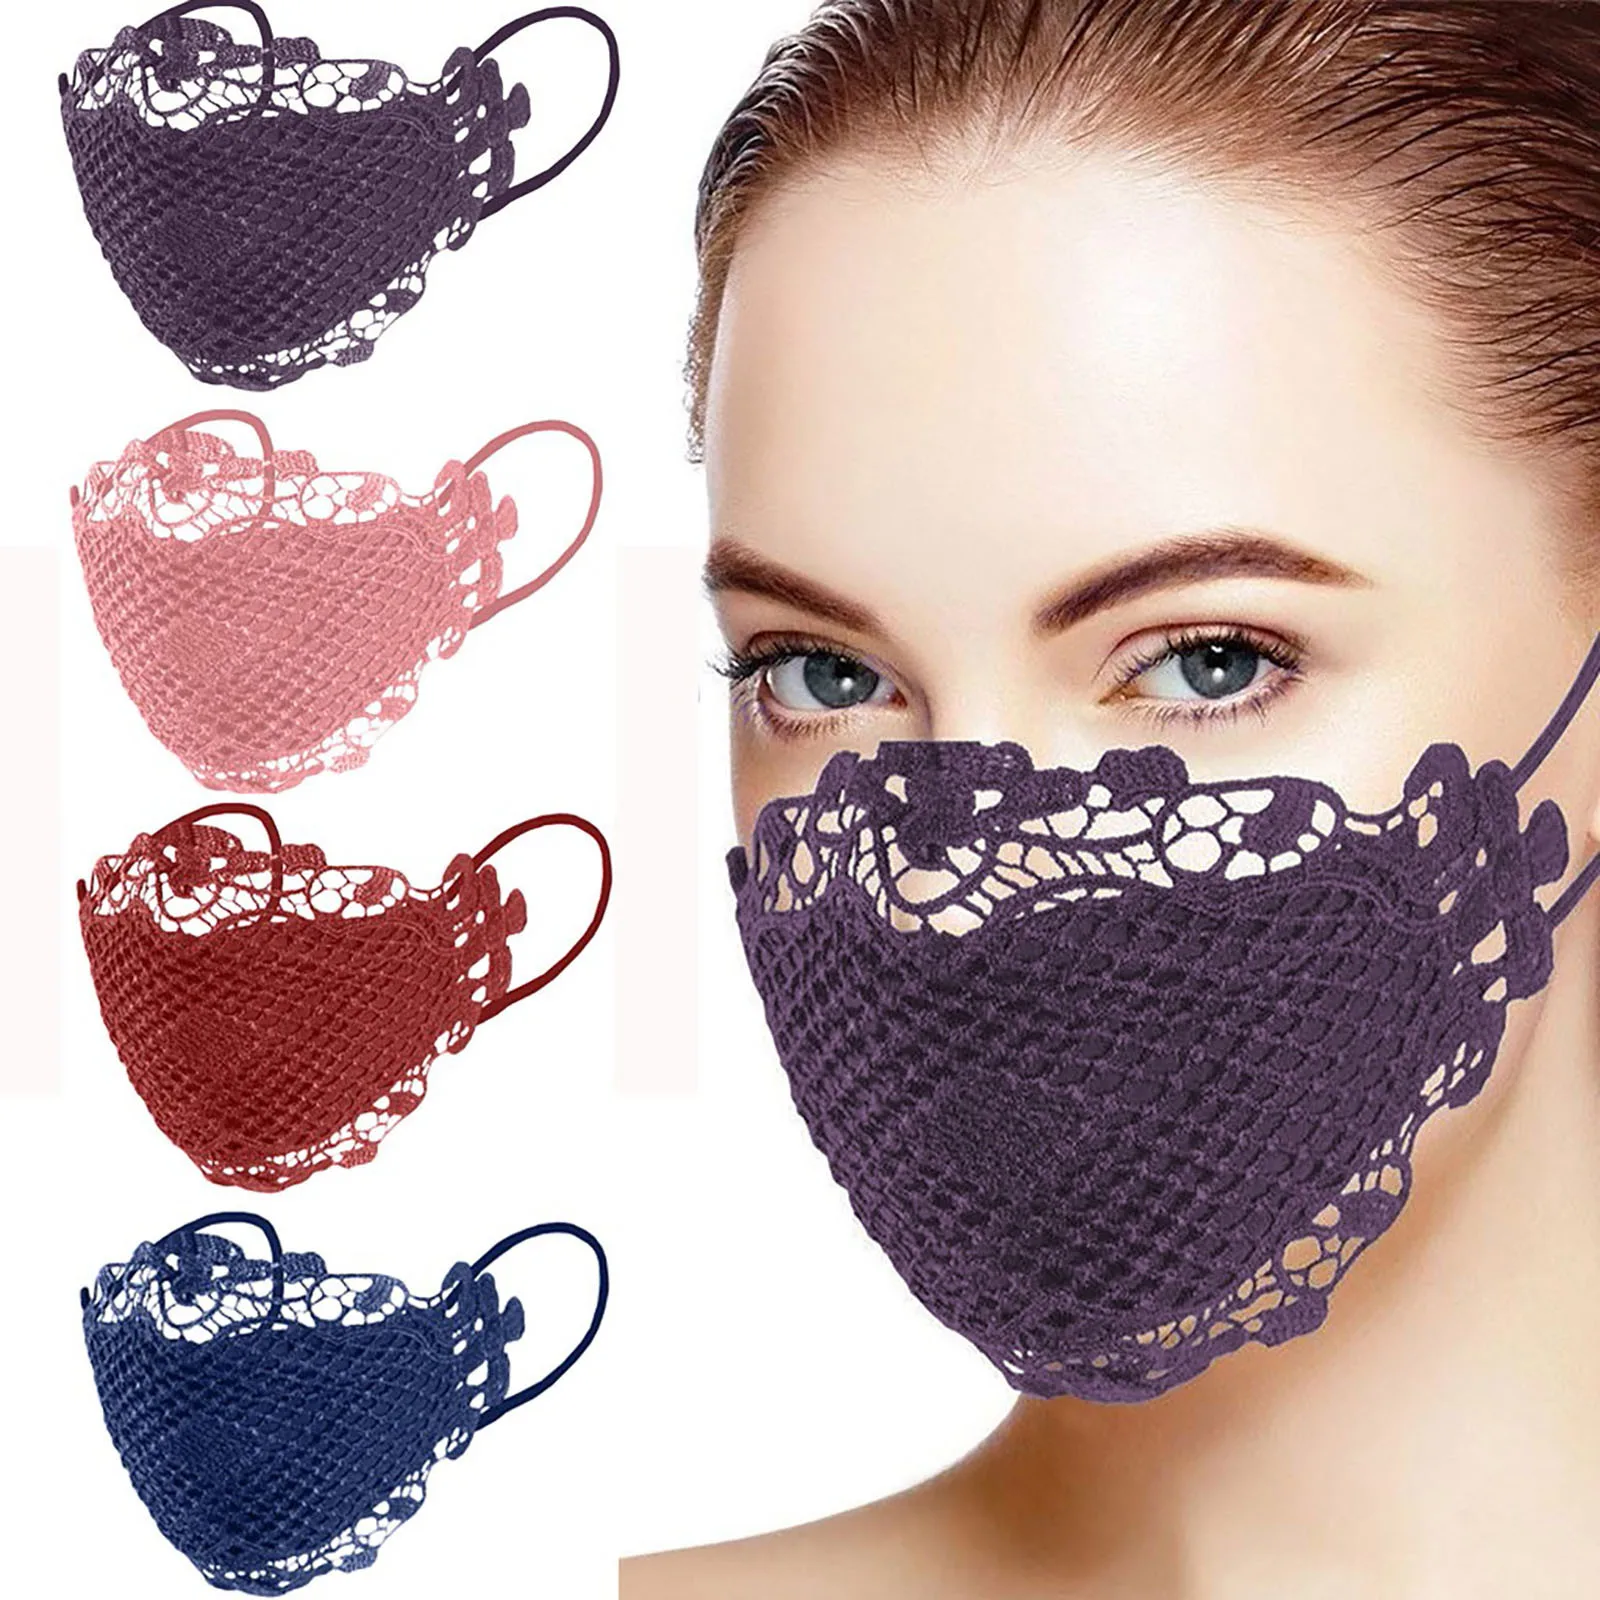 

Adult Delicate Lace Applique Face Mask Washable And Reusable Mouth Masks Dustproof Filter Pm2.5 Mask Party Decoration Facemask